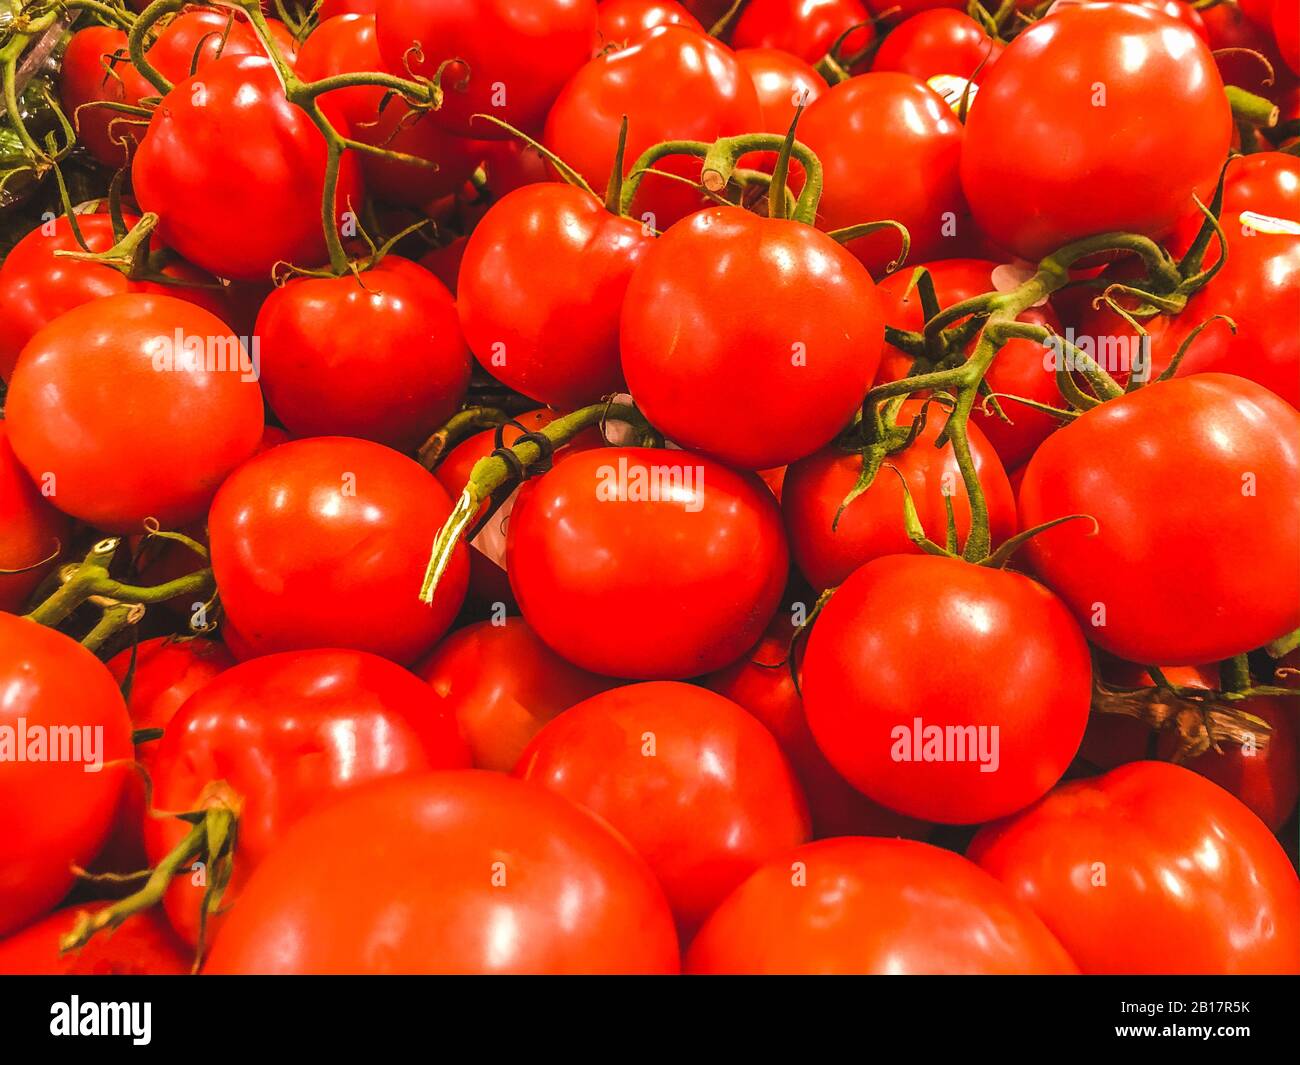 A group of tomatoes for sale at local supermarket Stock Photo